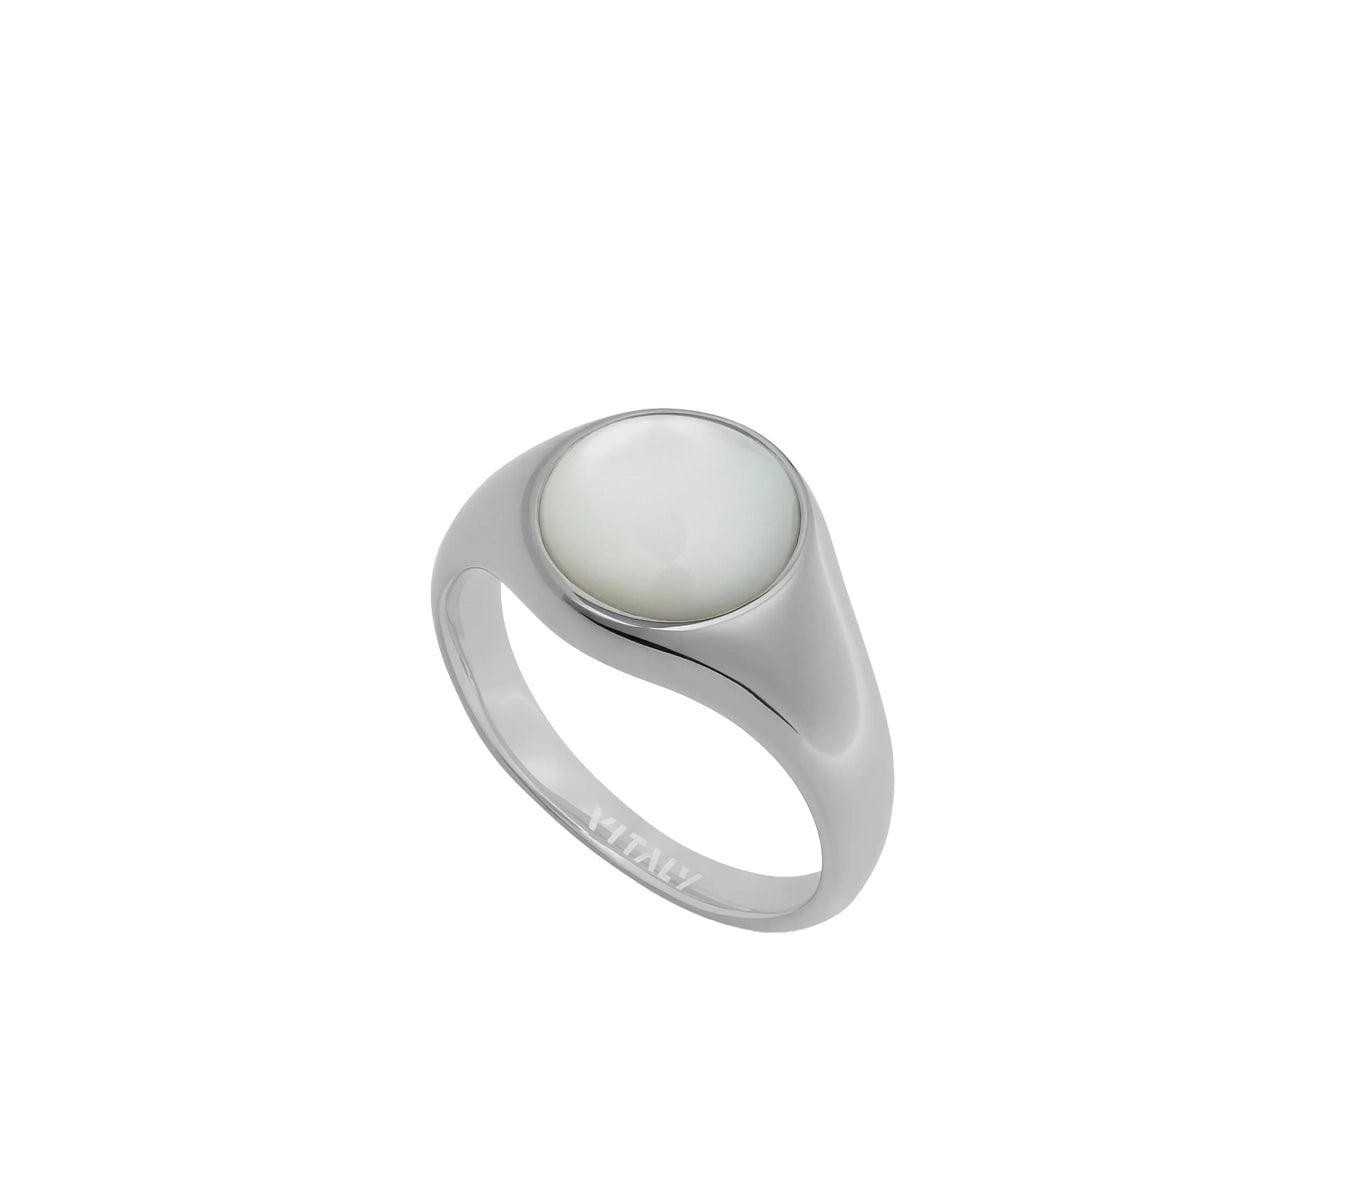 VITALY Bond Stainless Steel Ring / Pearl - SUPERCONSCIOUS BERLIN